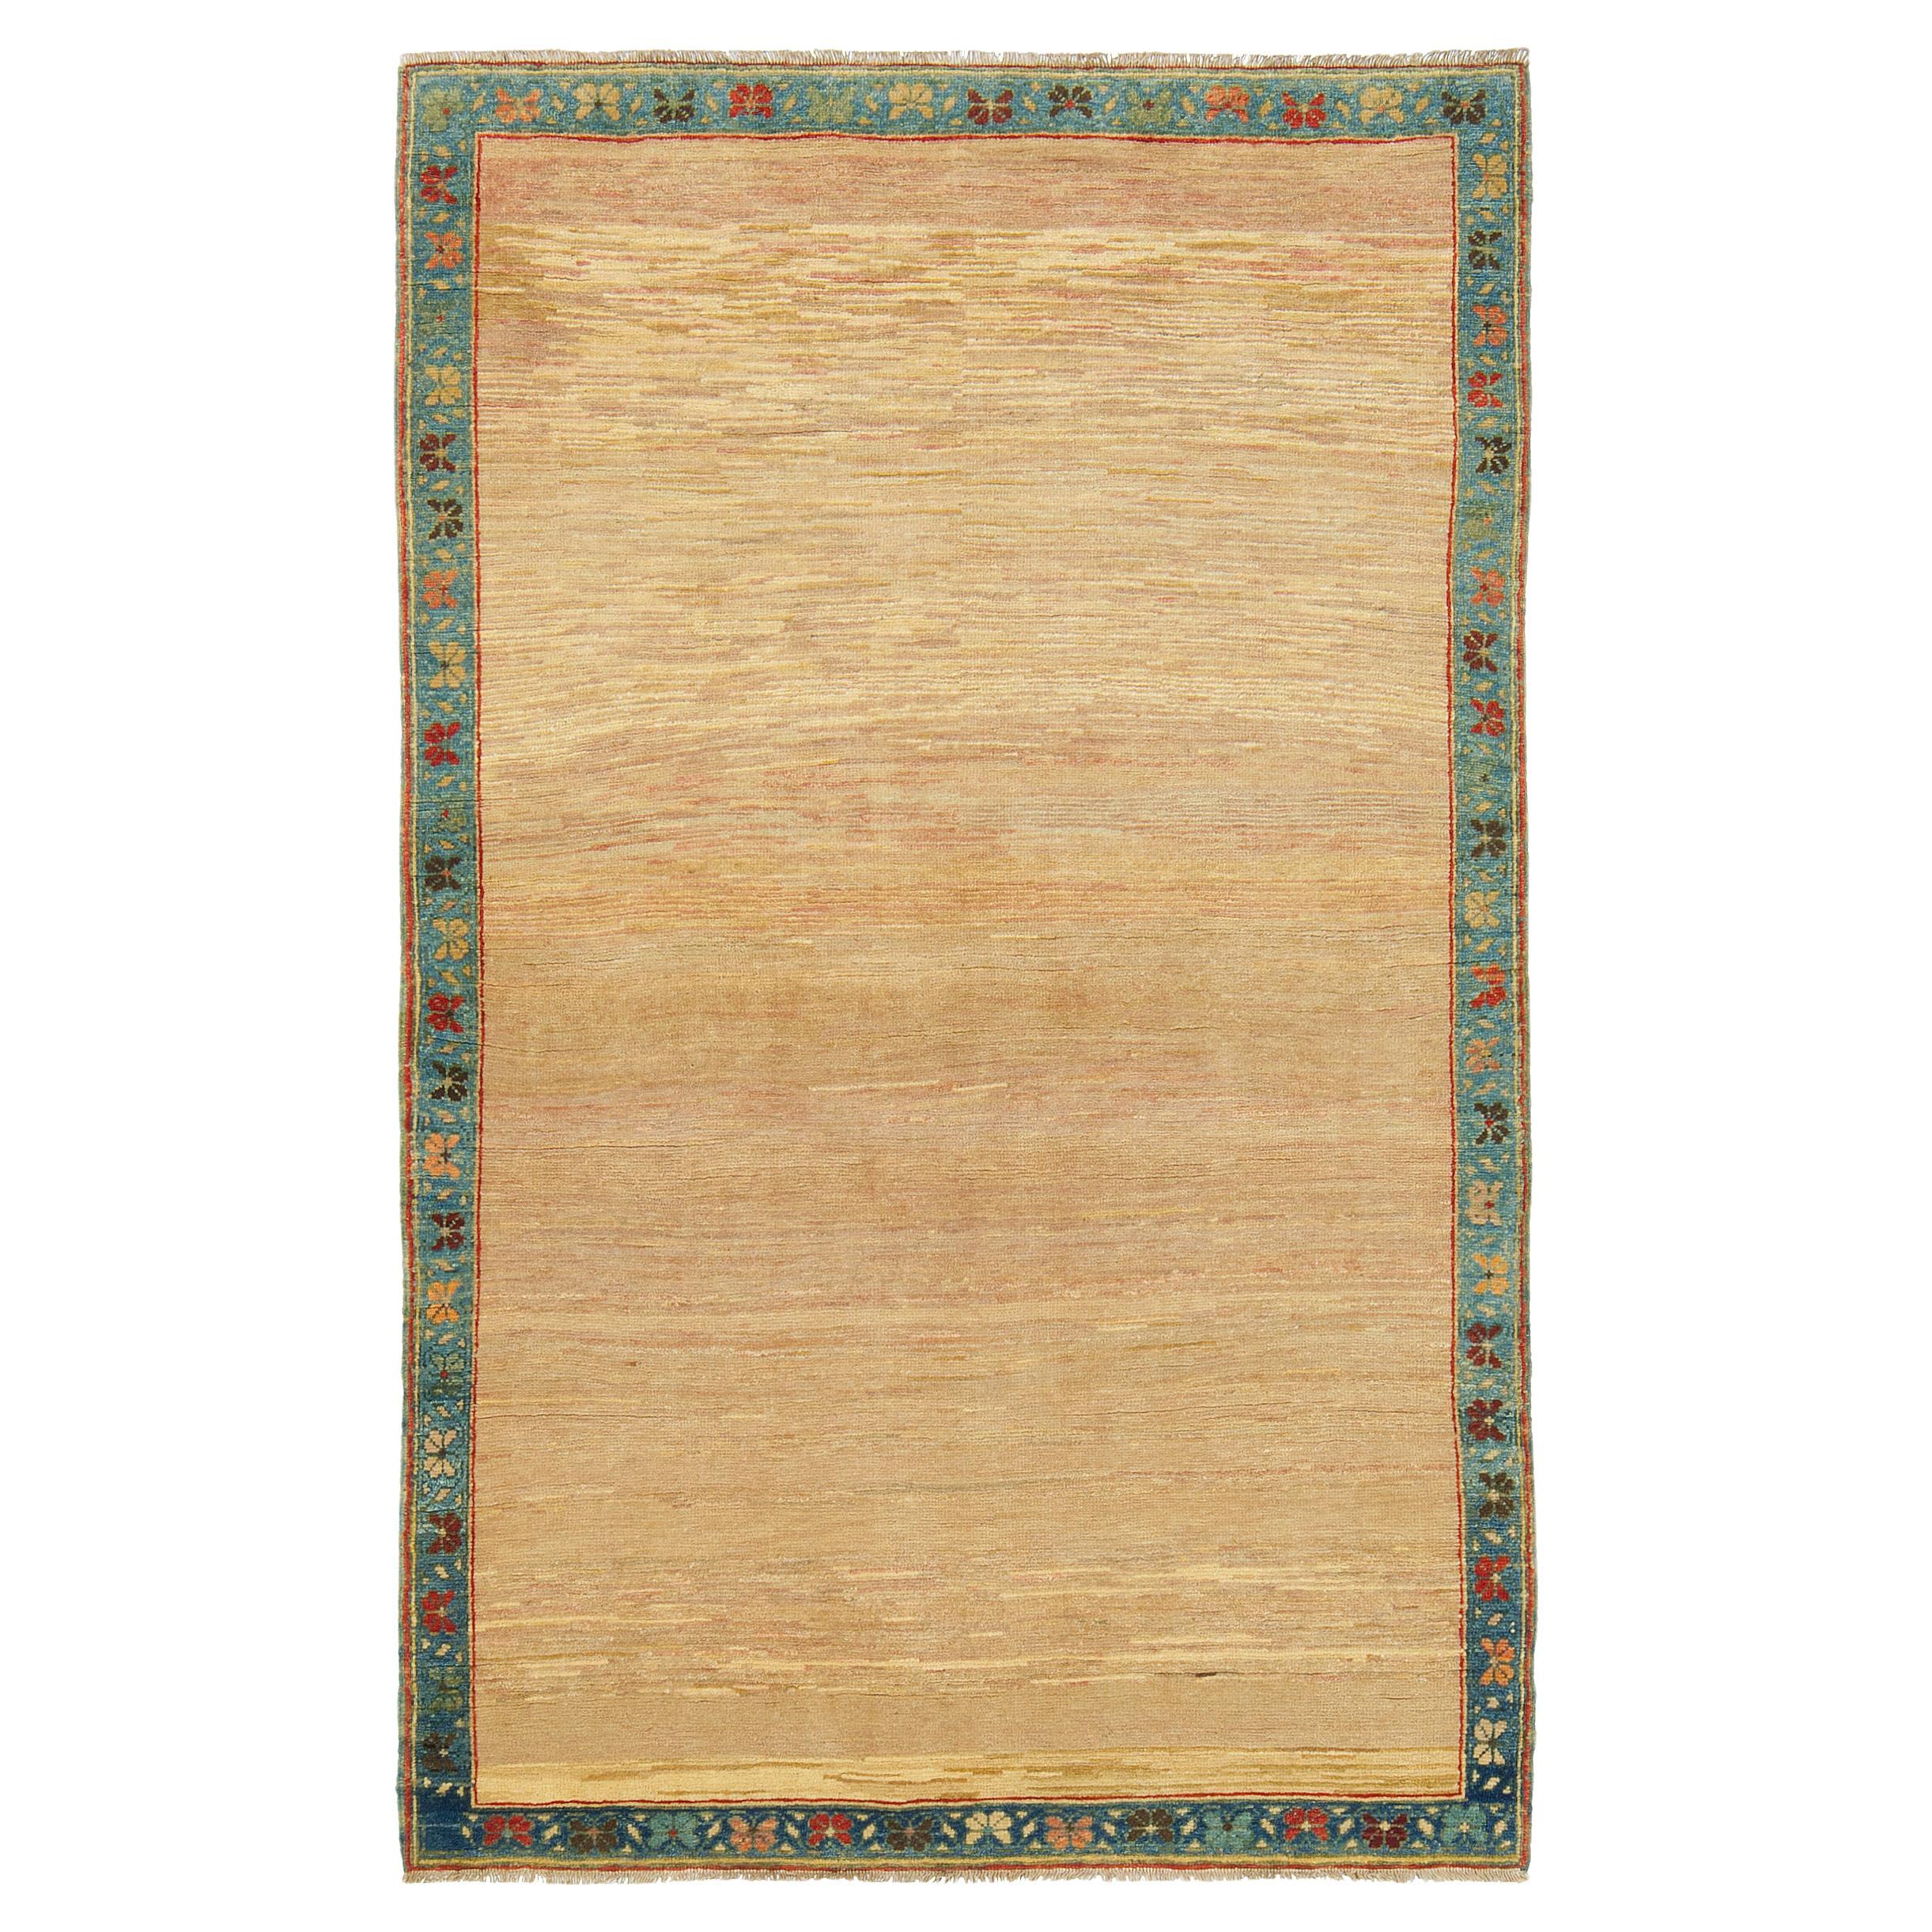 Ararat Rugs the Yellow-Brown Color Rug, Modern Desert Sand Carpet Natural Dyed For Sale